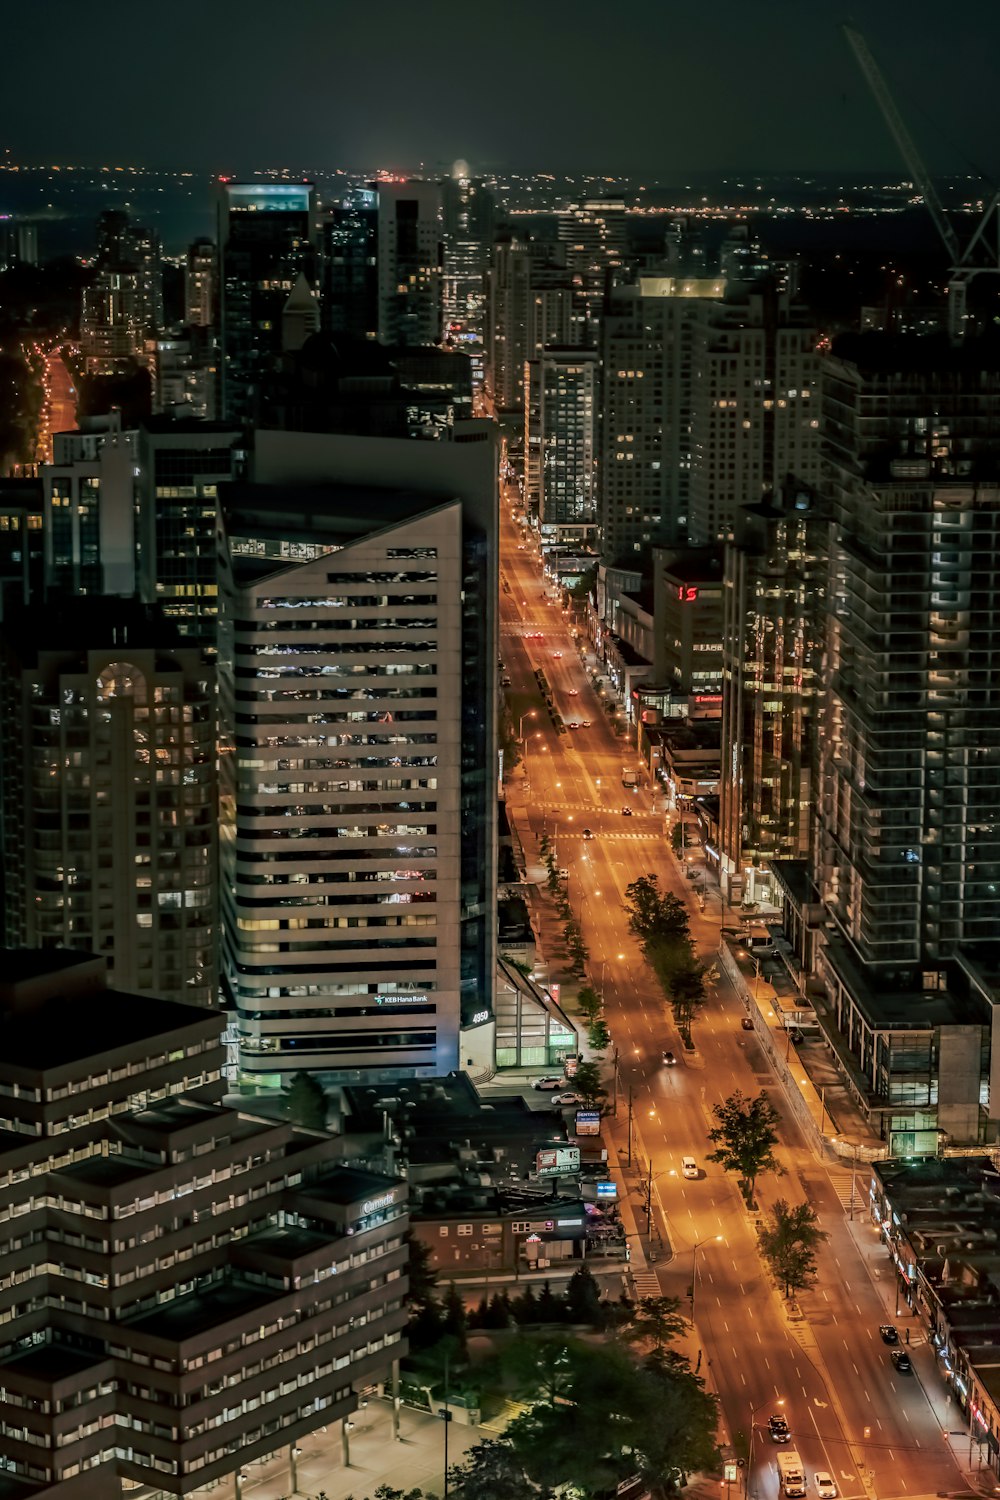 a view of a city at night from the top of a building